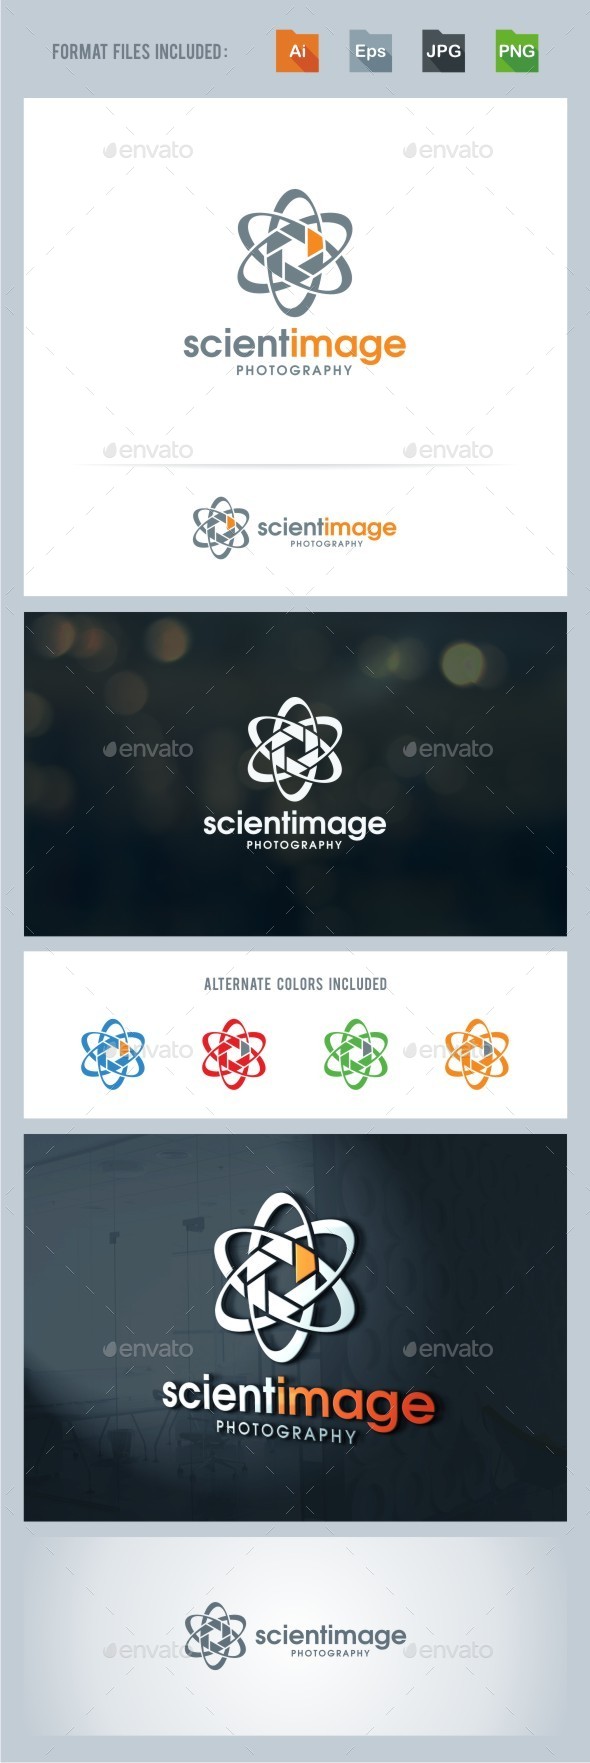 Science Image - Photography Logo Template